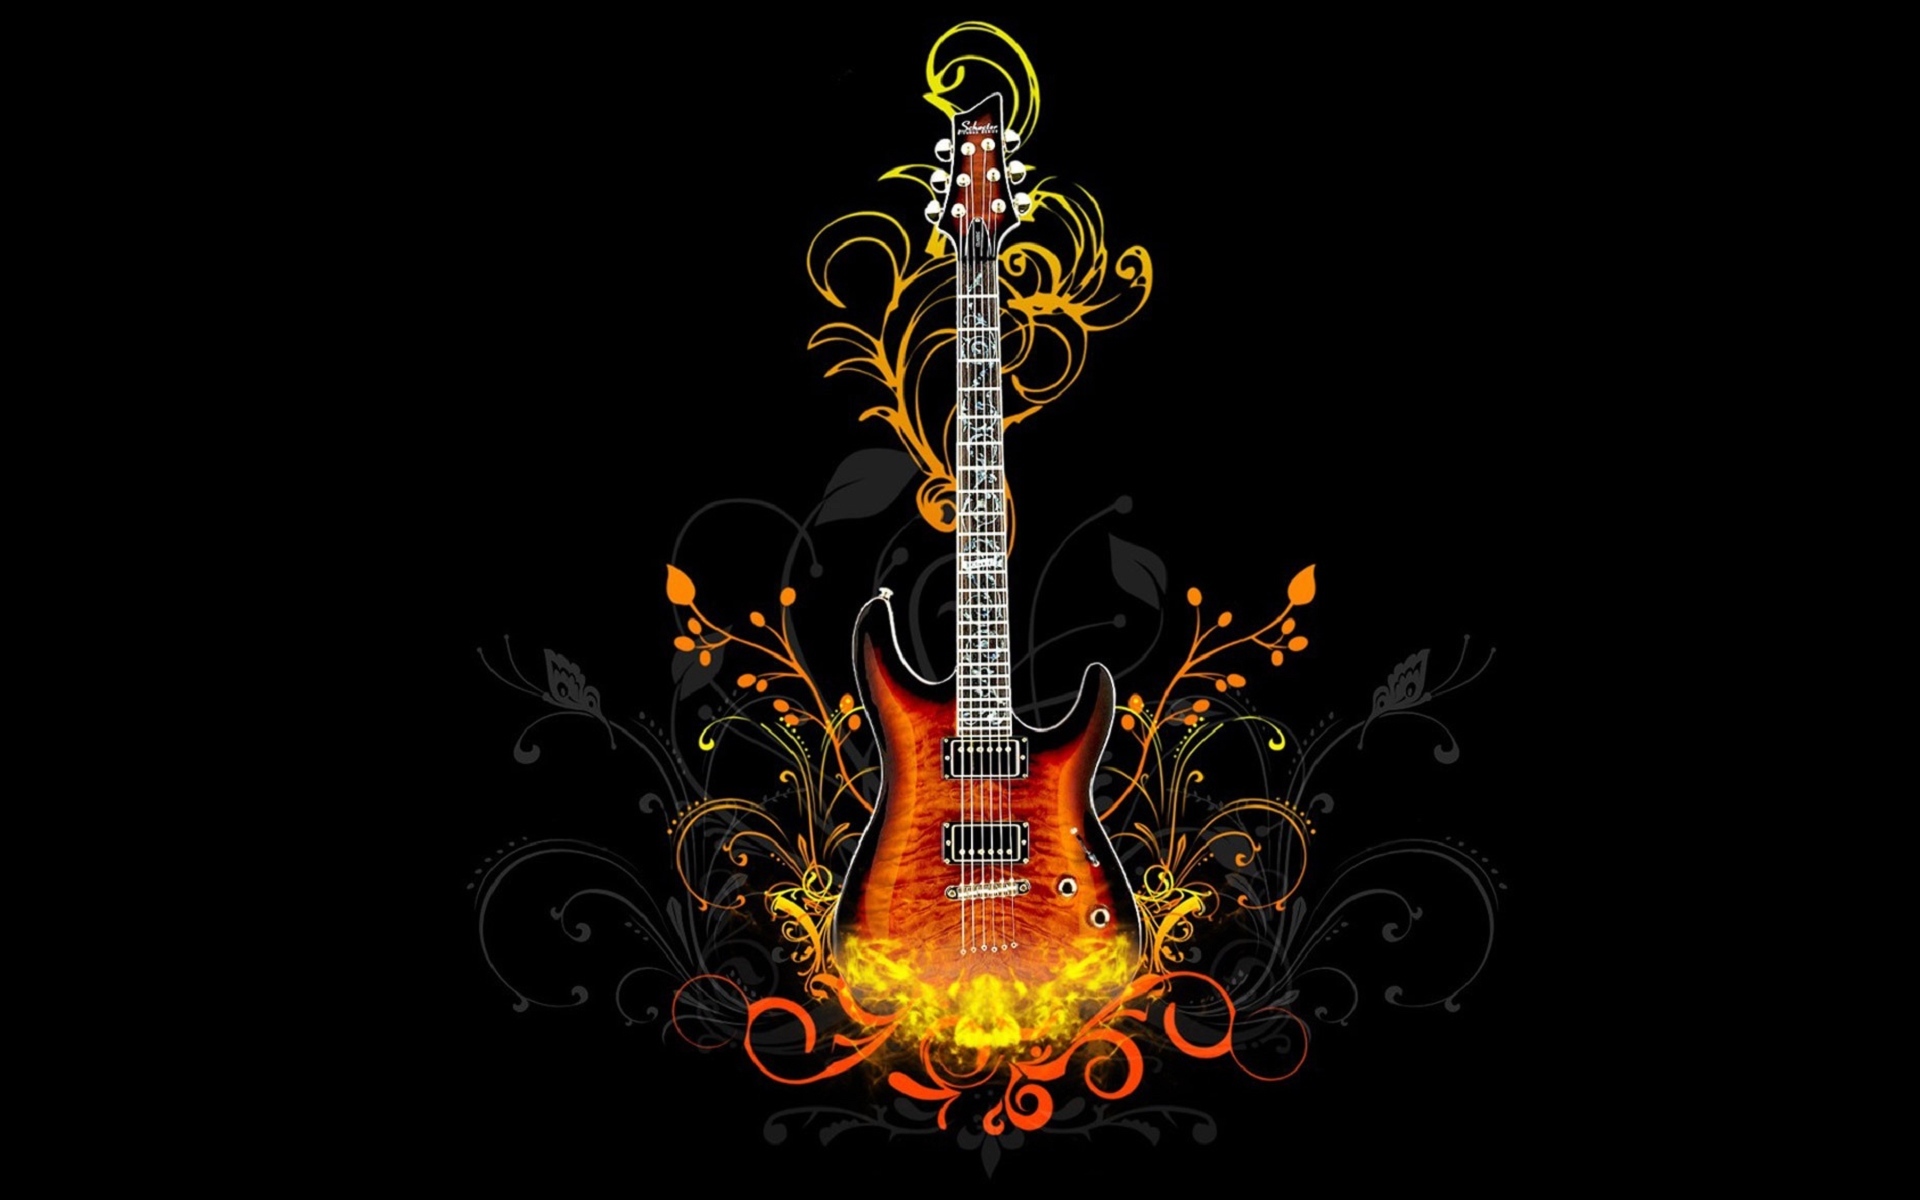 pictures, black, guitars, tools, music cellphone